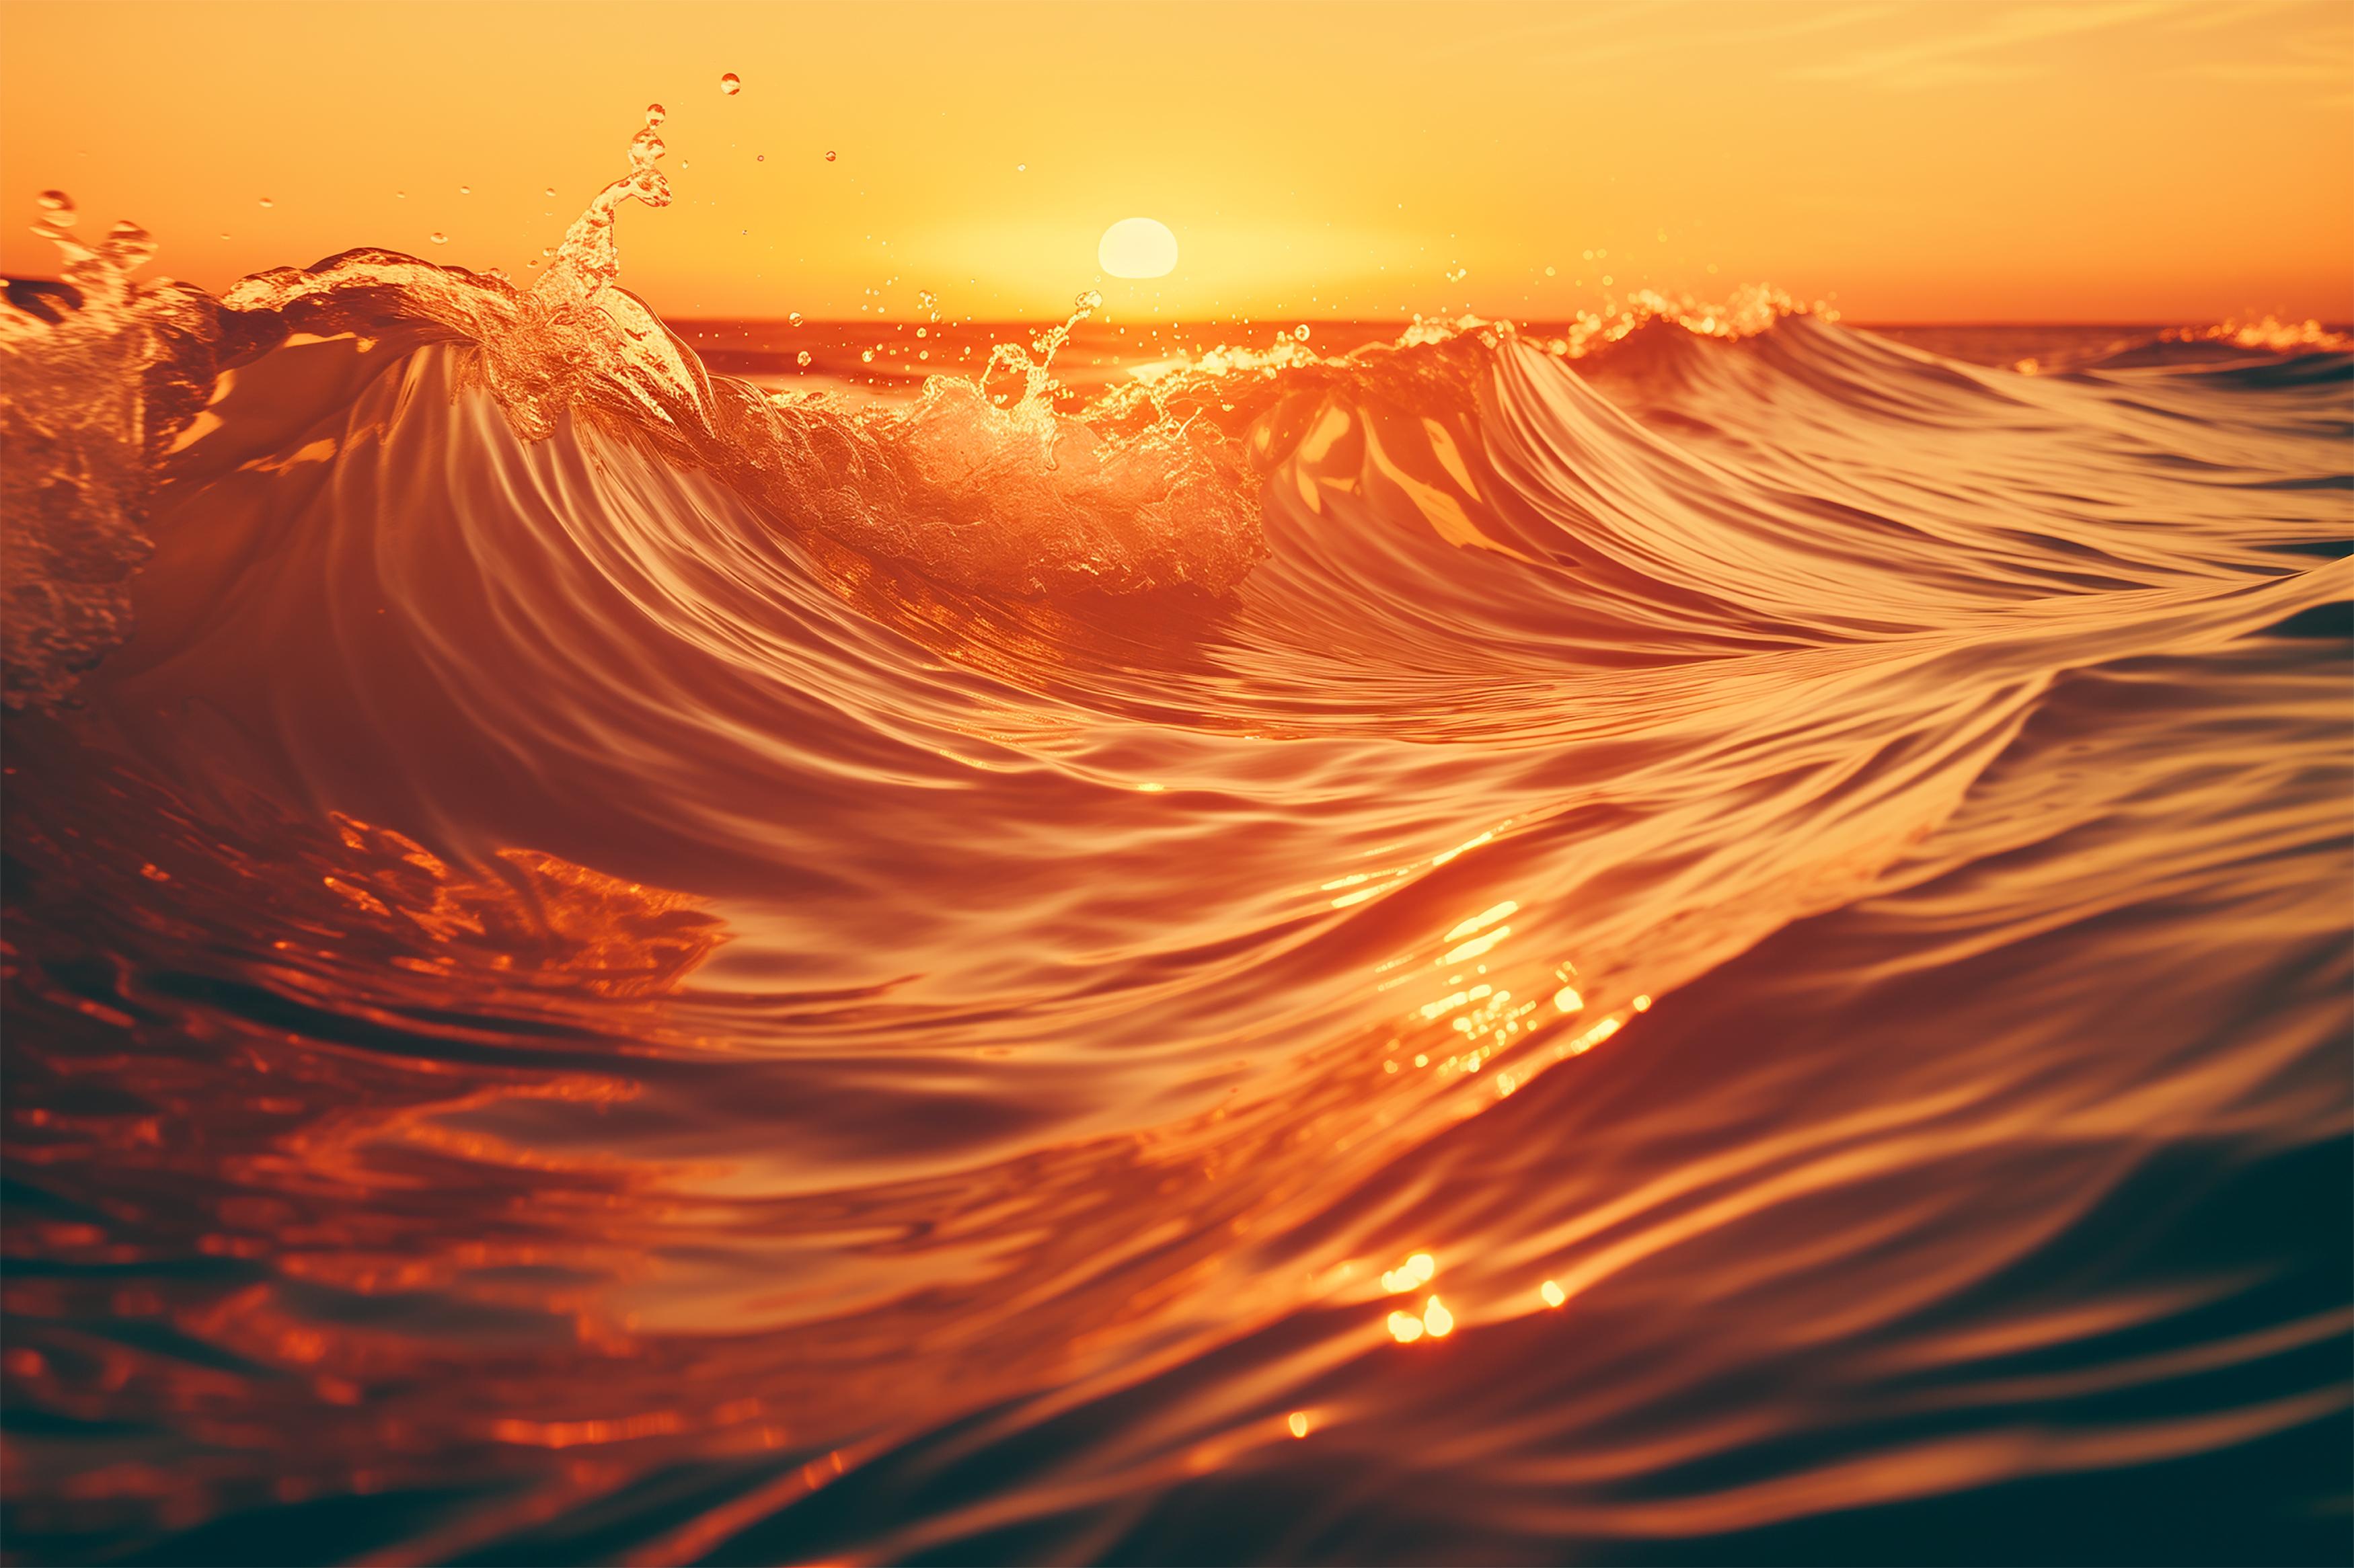 The waves of the sea at sunset